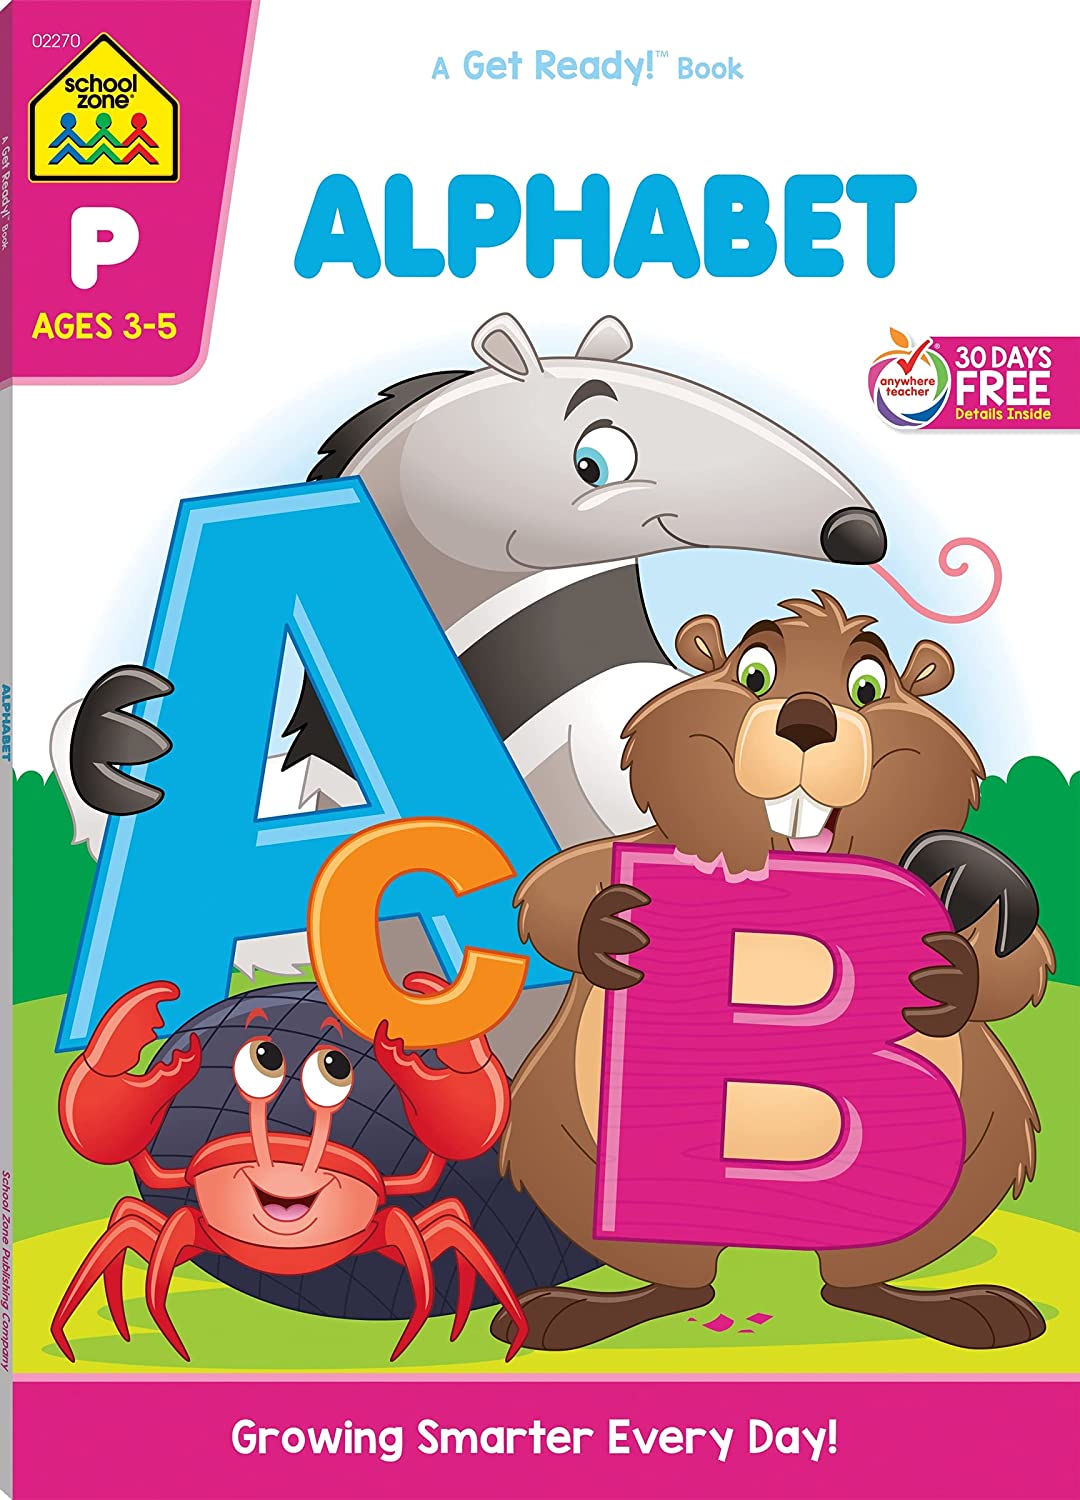 School Zone – Alphabet Workbook – 64 Pages, Ages 3 to 5, Preschool, ABC’s, Letters, Tracing, Alphabetical Order, and More (School Zone Get Ready!™ Book Series)